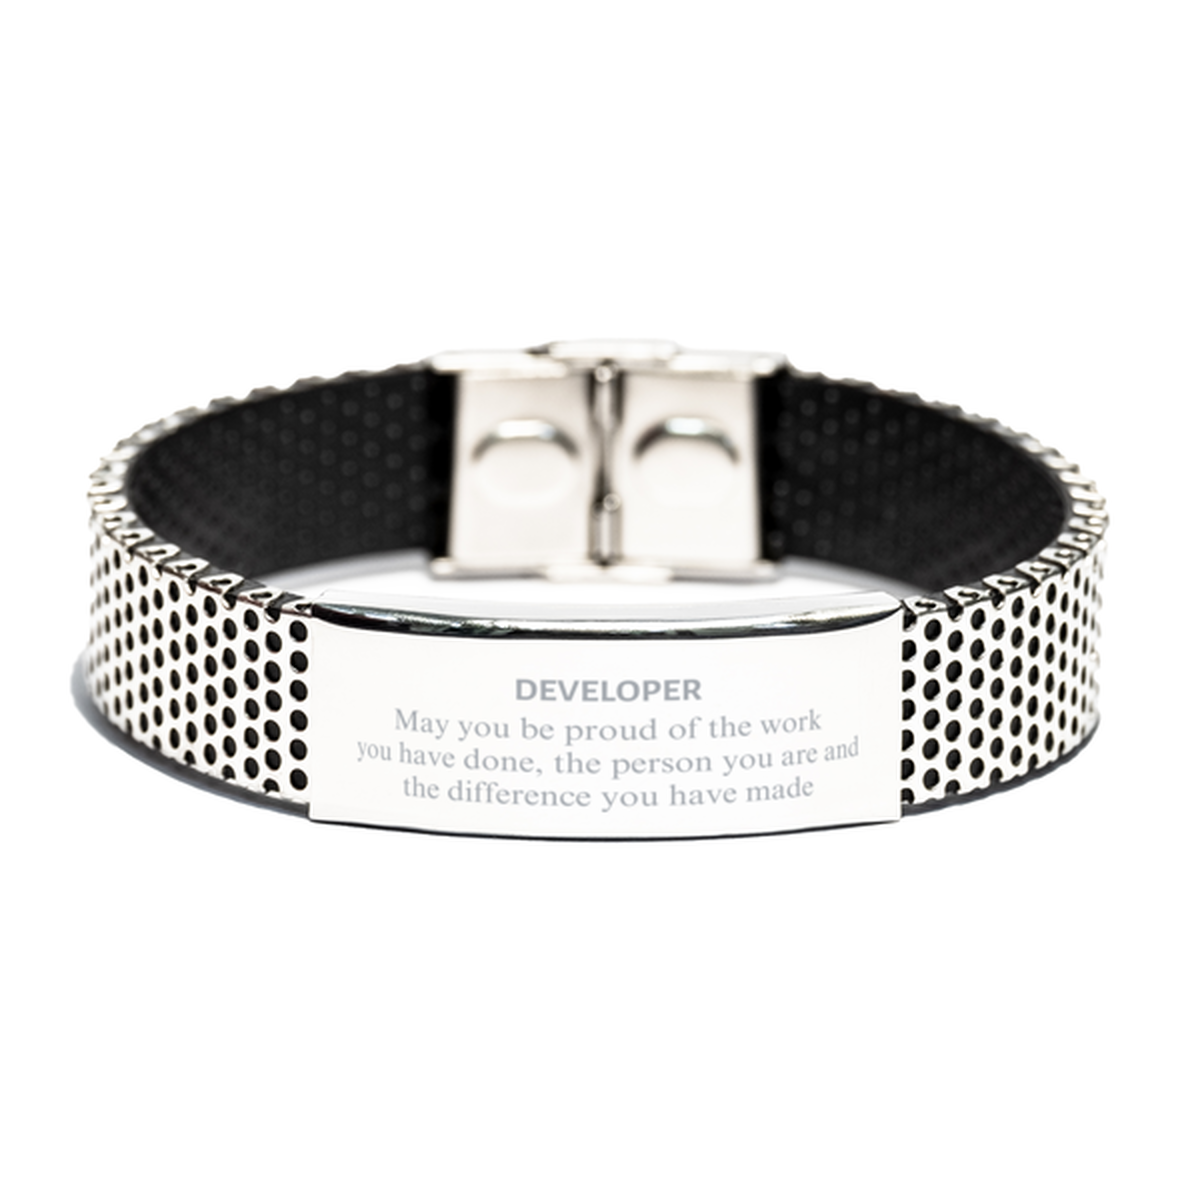 Developer May you be proud of the work you have done, Retirement Developer Stainless Steel Bracelet for Colleague Appreciation Gifts Amazing for Developer